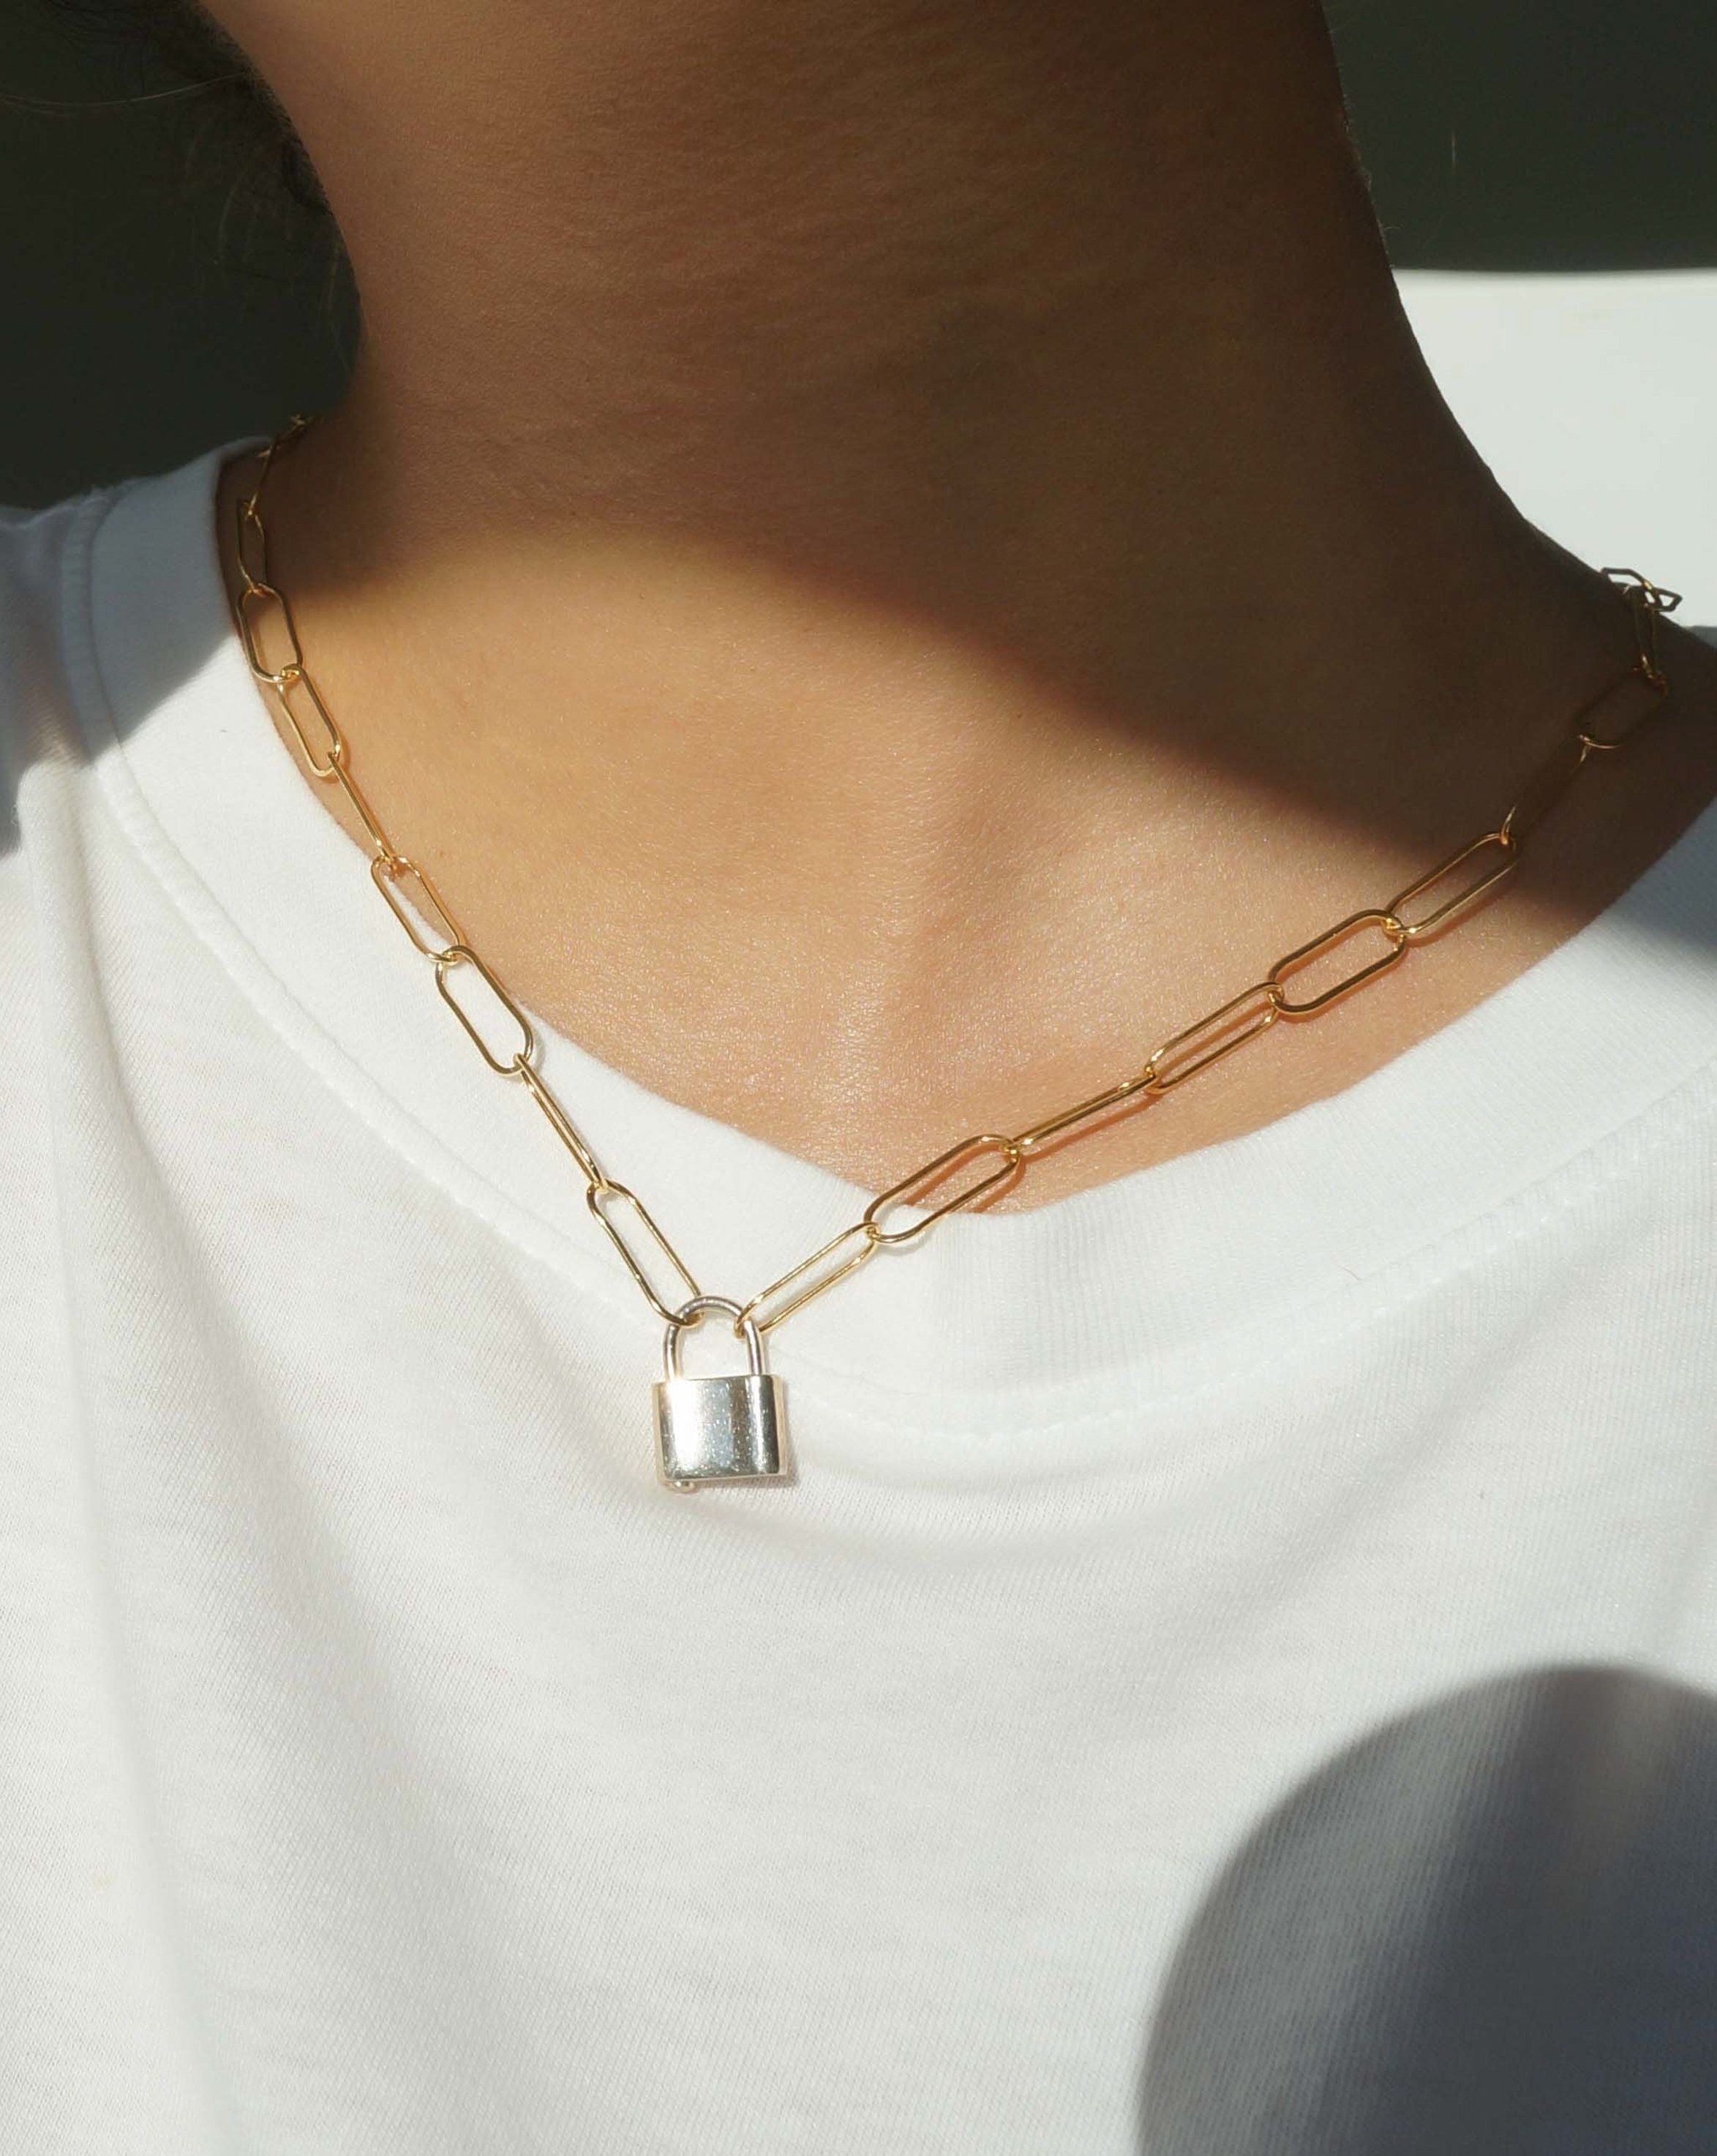 Locklyn Necklace by KOZAKH. A 15 inches long paperclip style chain necklace, crafted in 14K Gold Filled, featuring a Sterling Silver padlock closure.